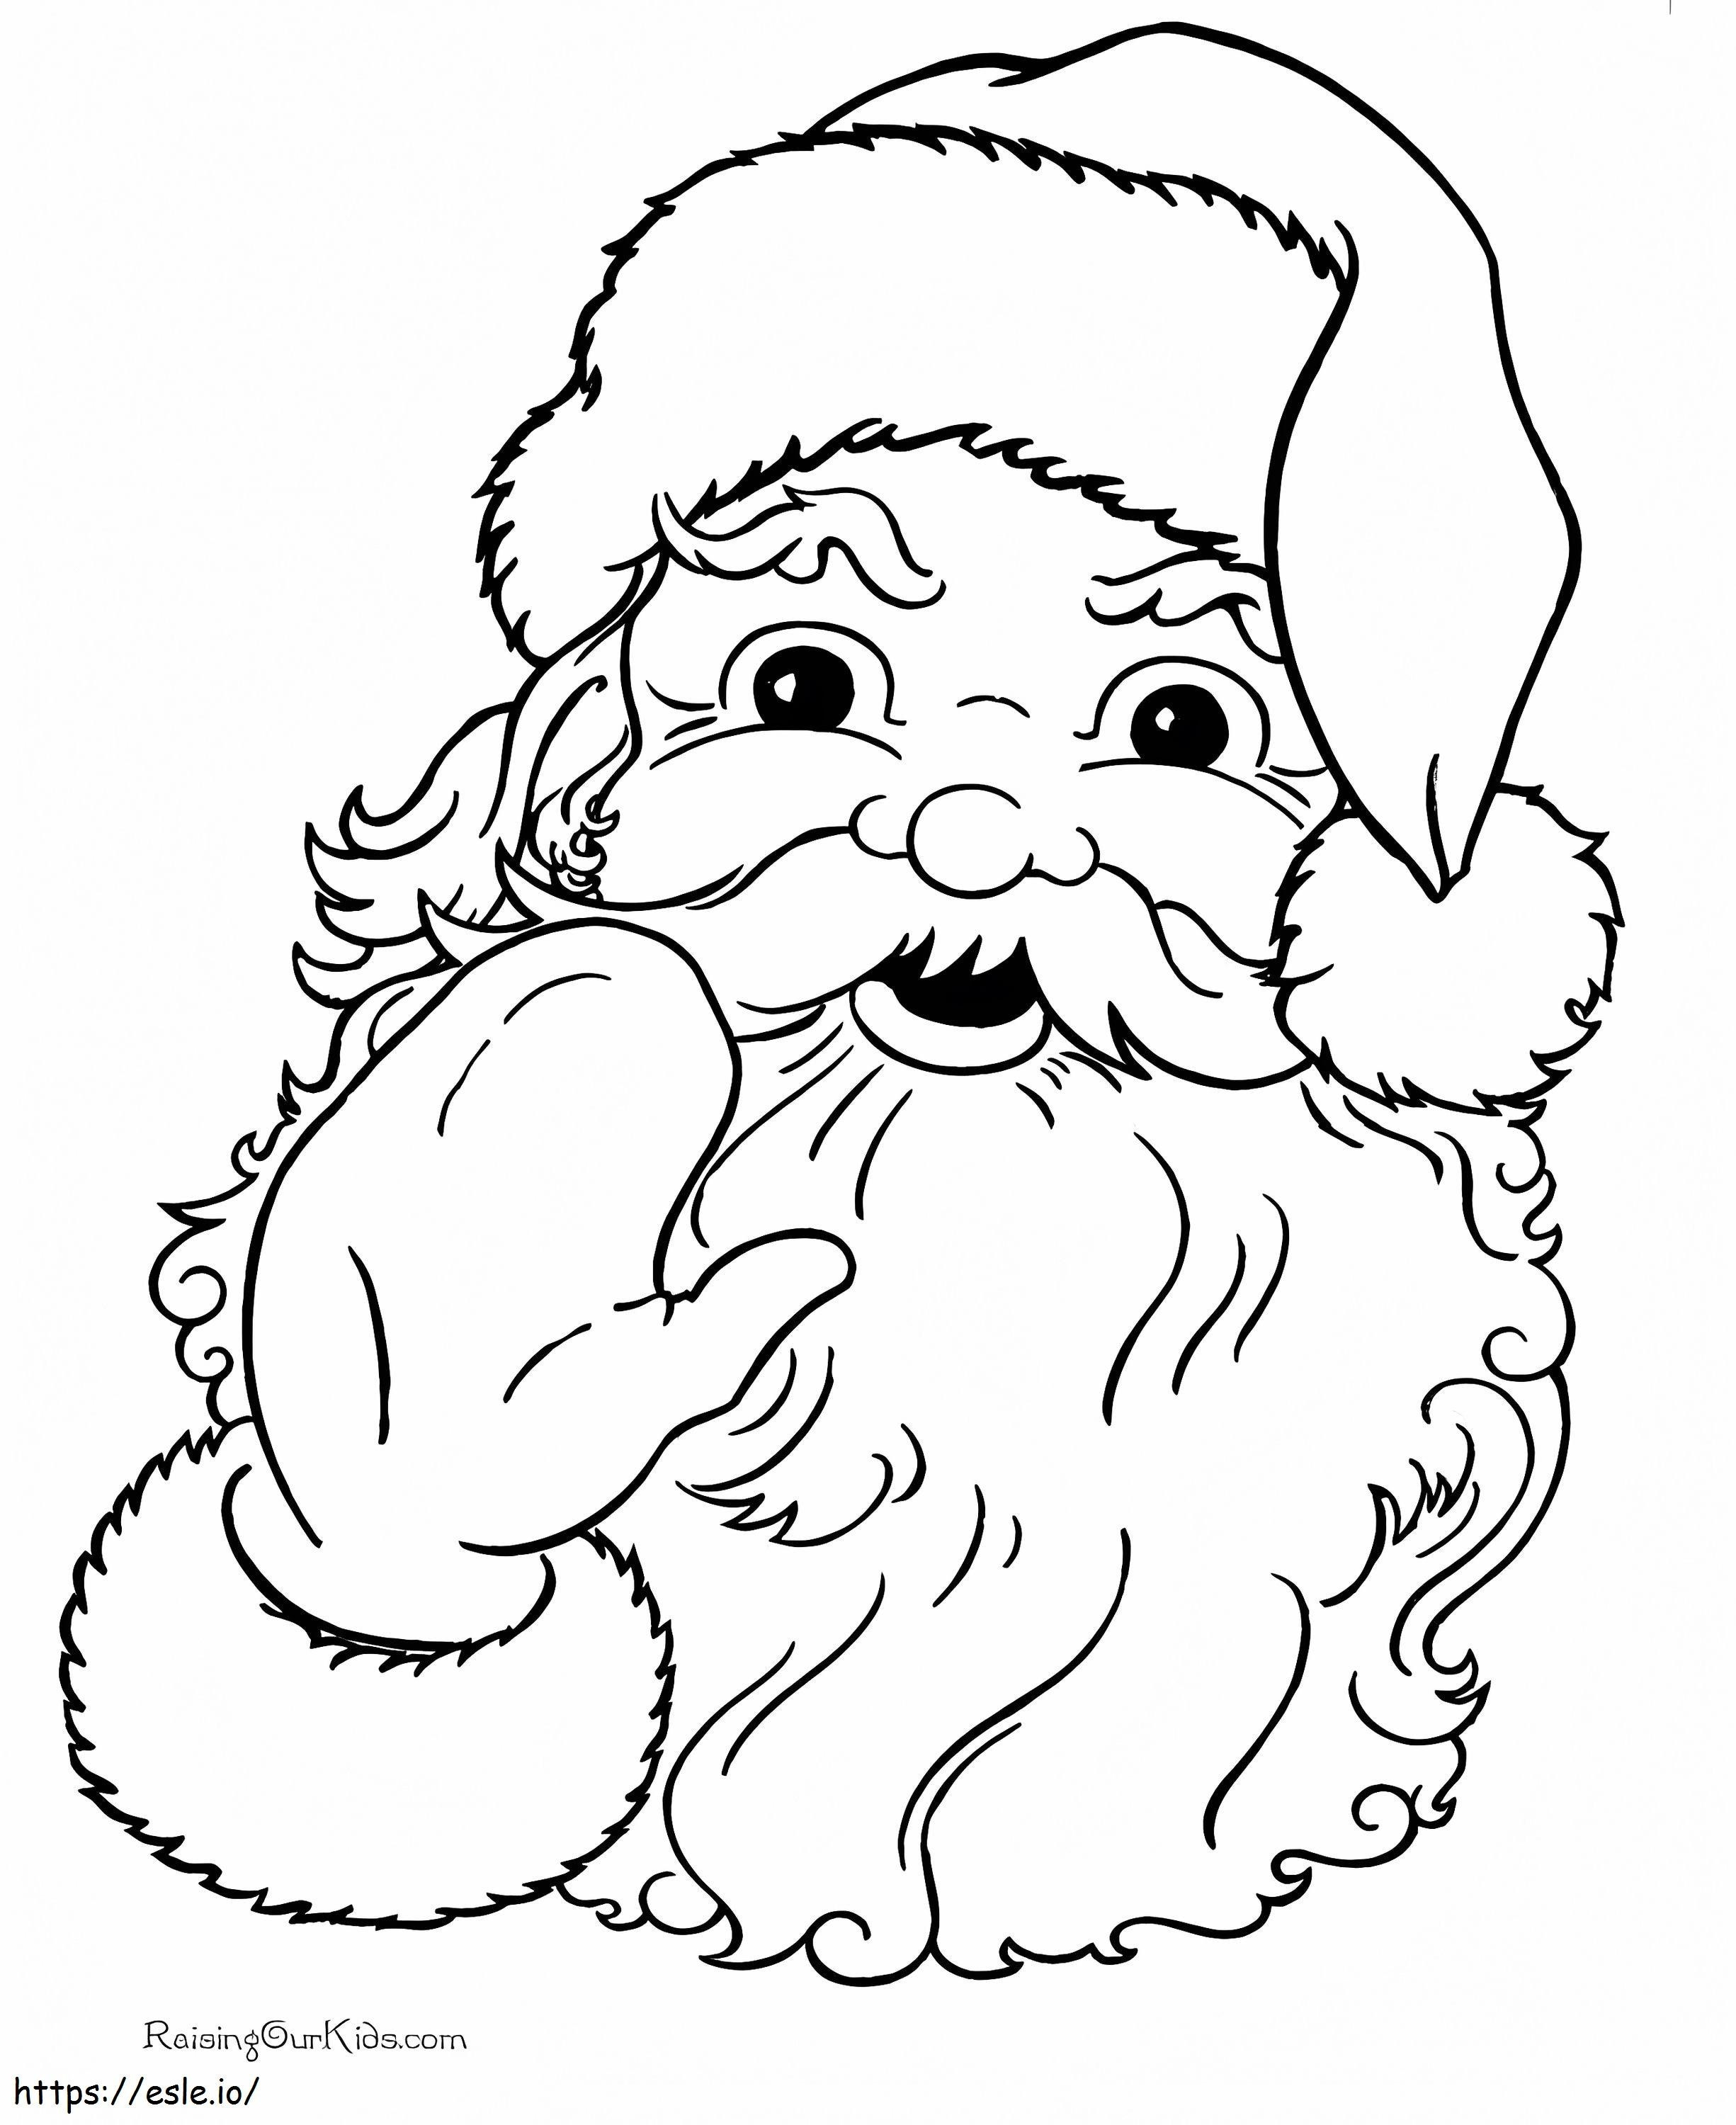 Collection Of For Christmas Printable Ideas Of Easy Christmas Of Easy Christmas coloring page